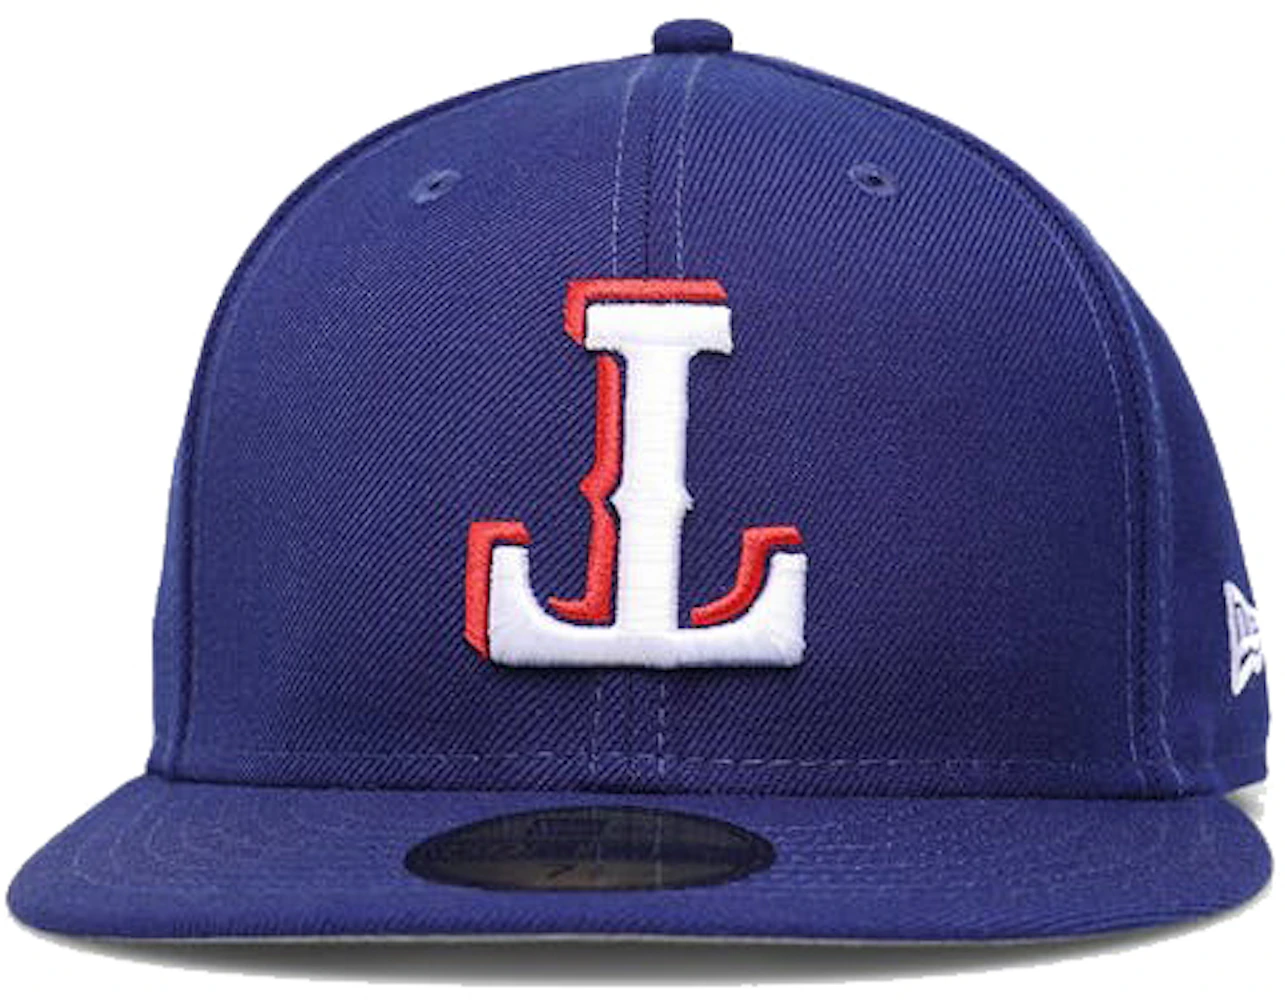 NEW ERA DENIM & BOOTS TEXAS RANGERS FITTED (NAVY/BROWN) – So